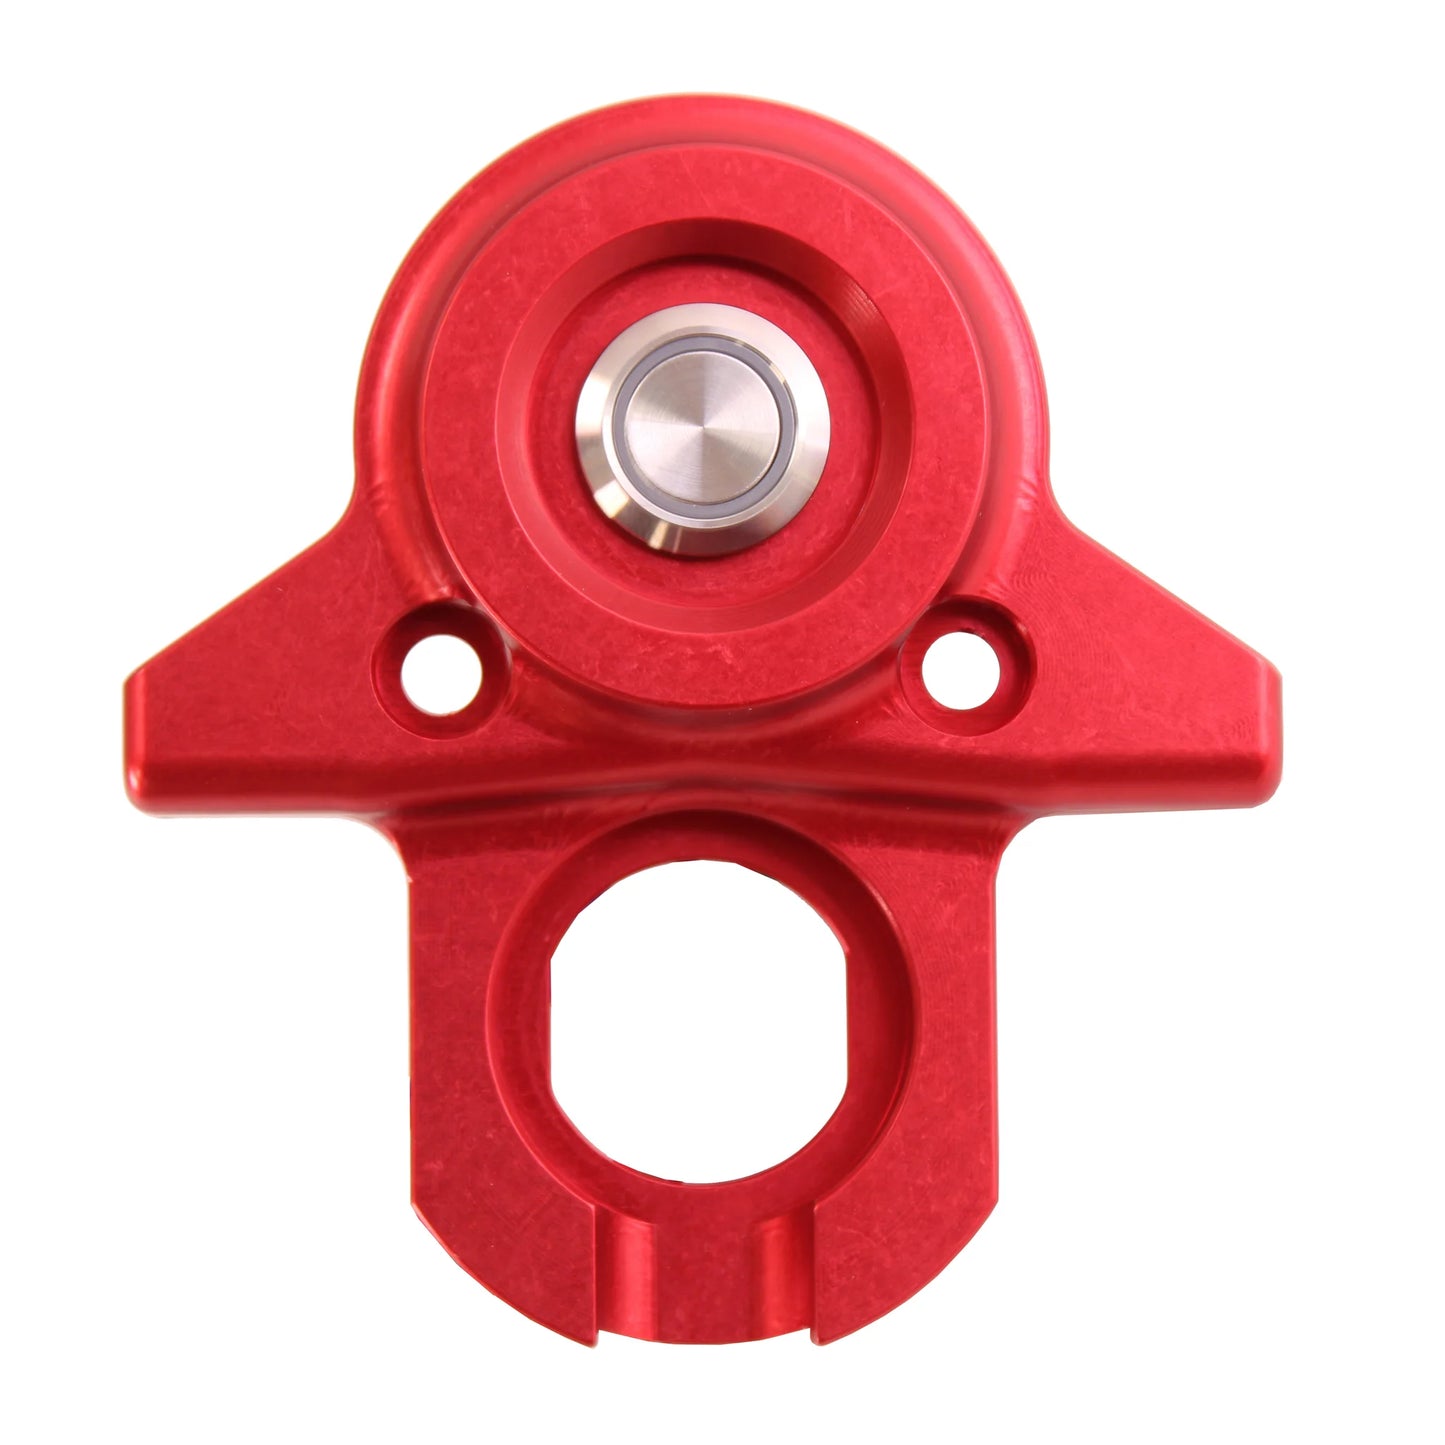 Push Button Version Ignition Switch Cover / Mount Plate